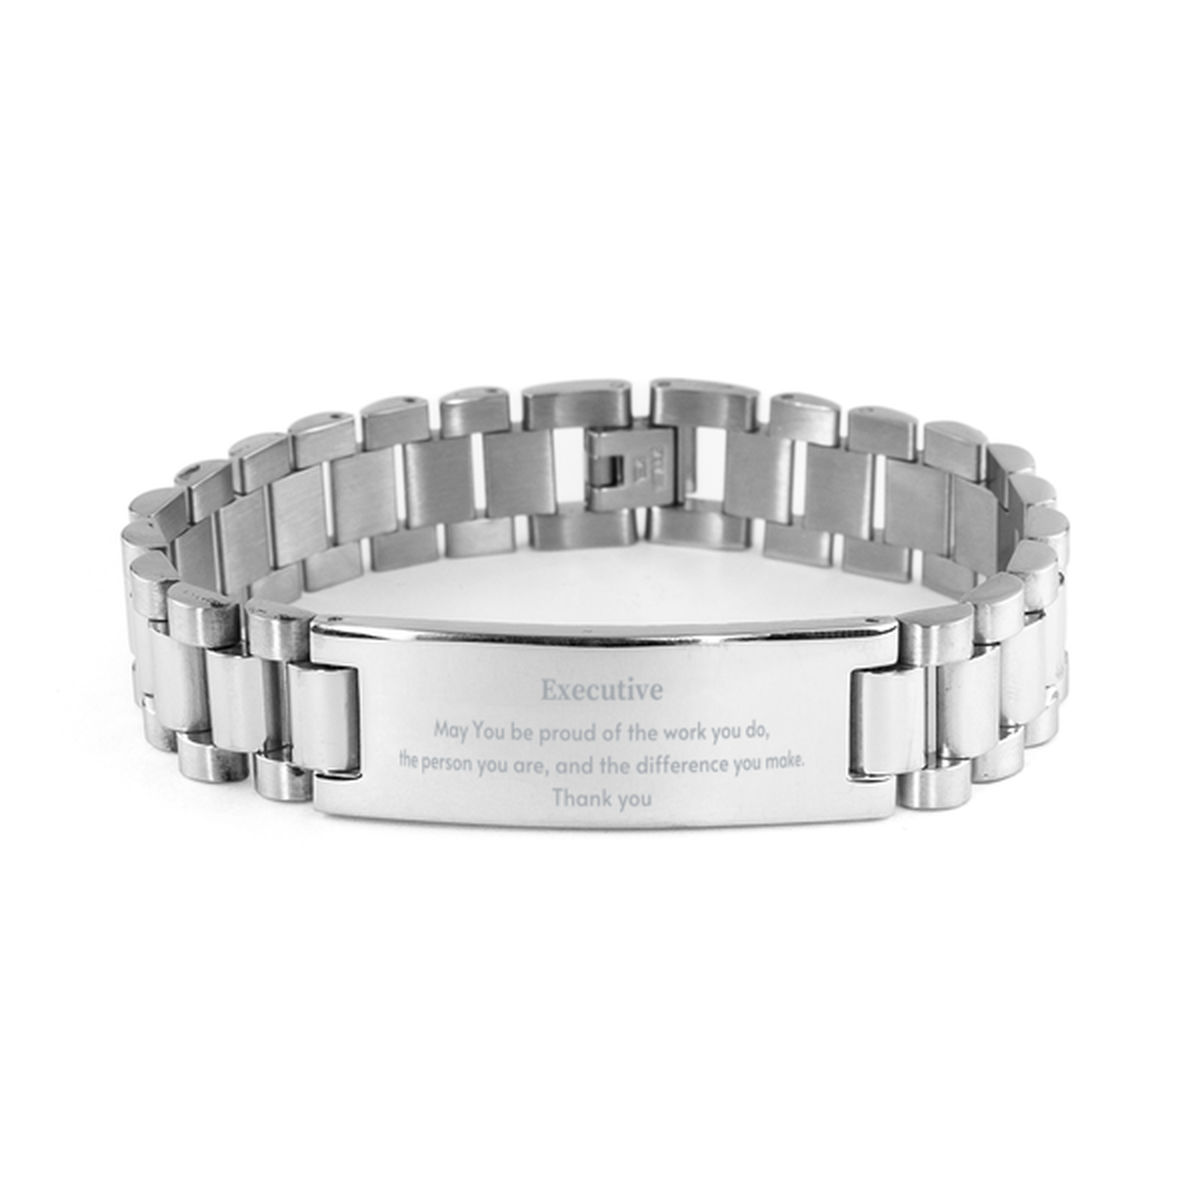 Heartwarming Ladder Stainless Steel Bracelet Retirement Coworkers Gifts for Executive, Executive May You be proud of the work you do, the person you are Gifts for Boss Men Women Friends